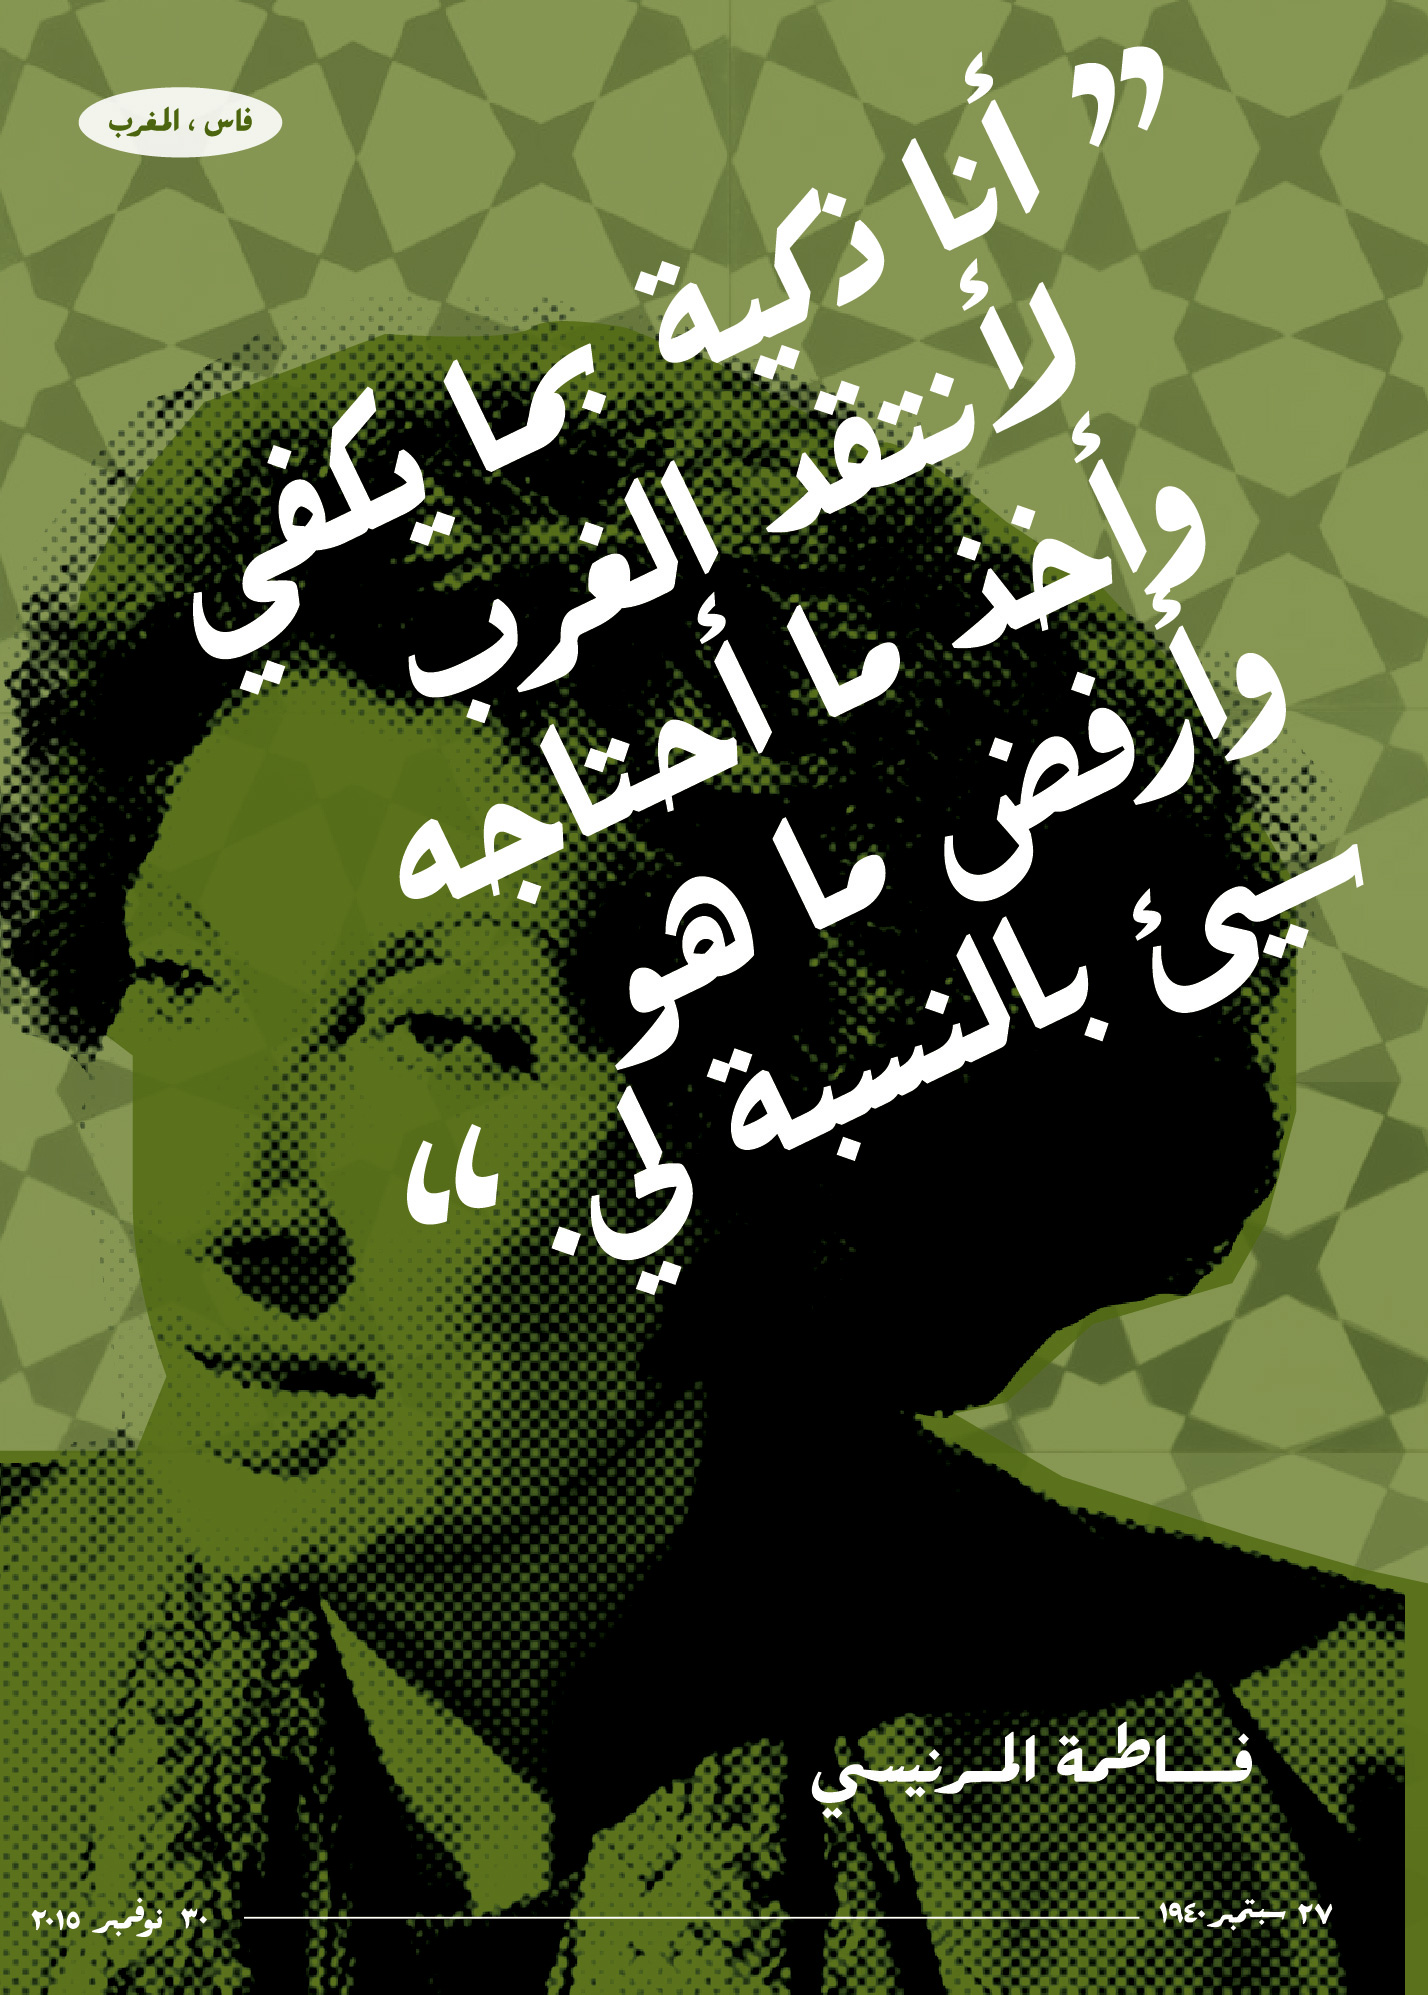 Green poster of woman with short dark hair and Arabic writing over her face